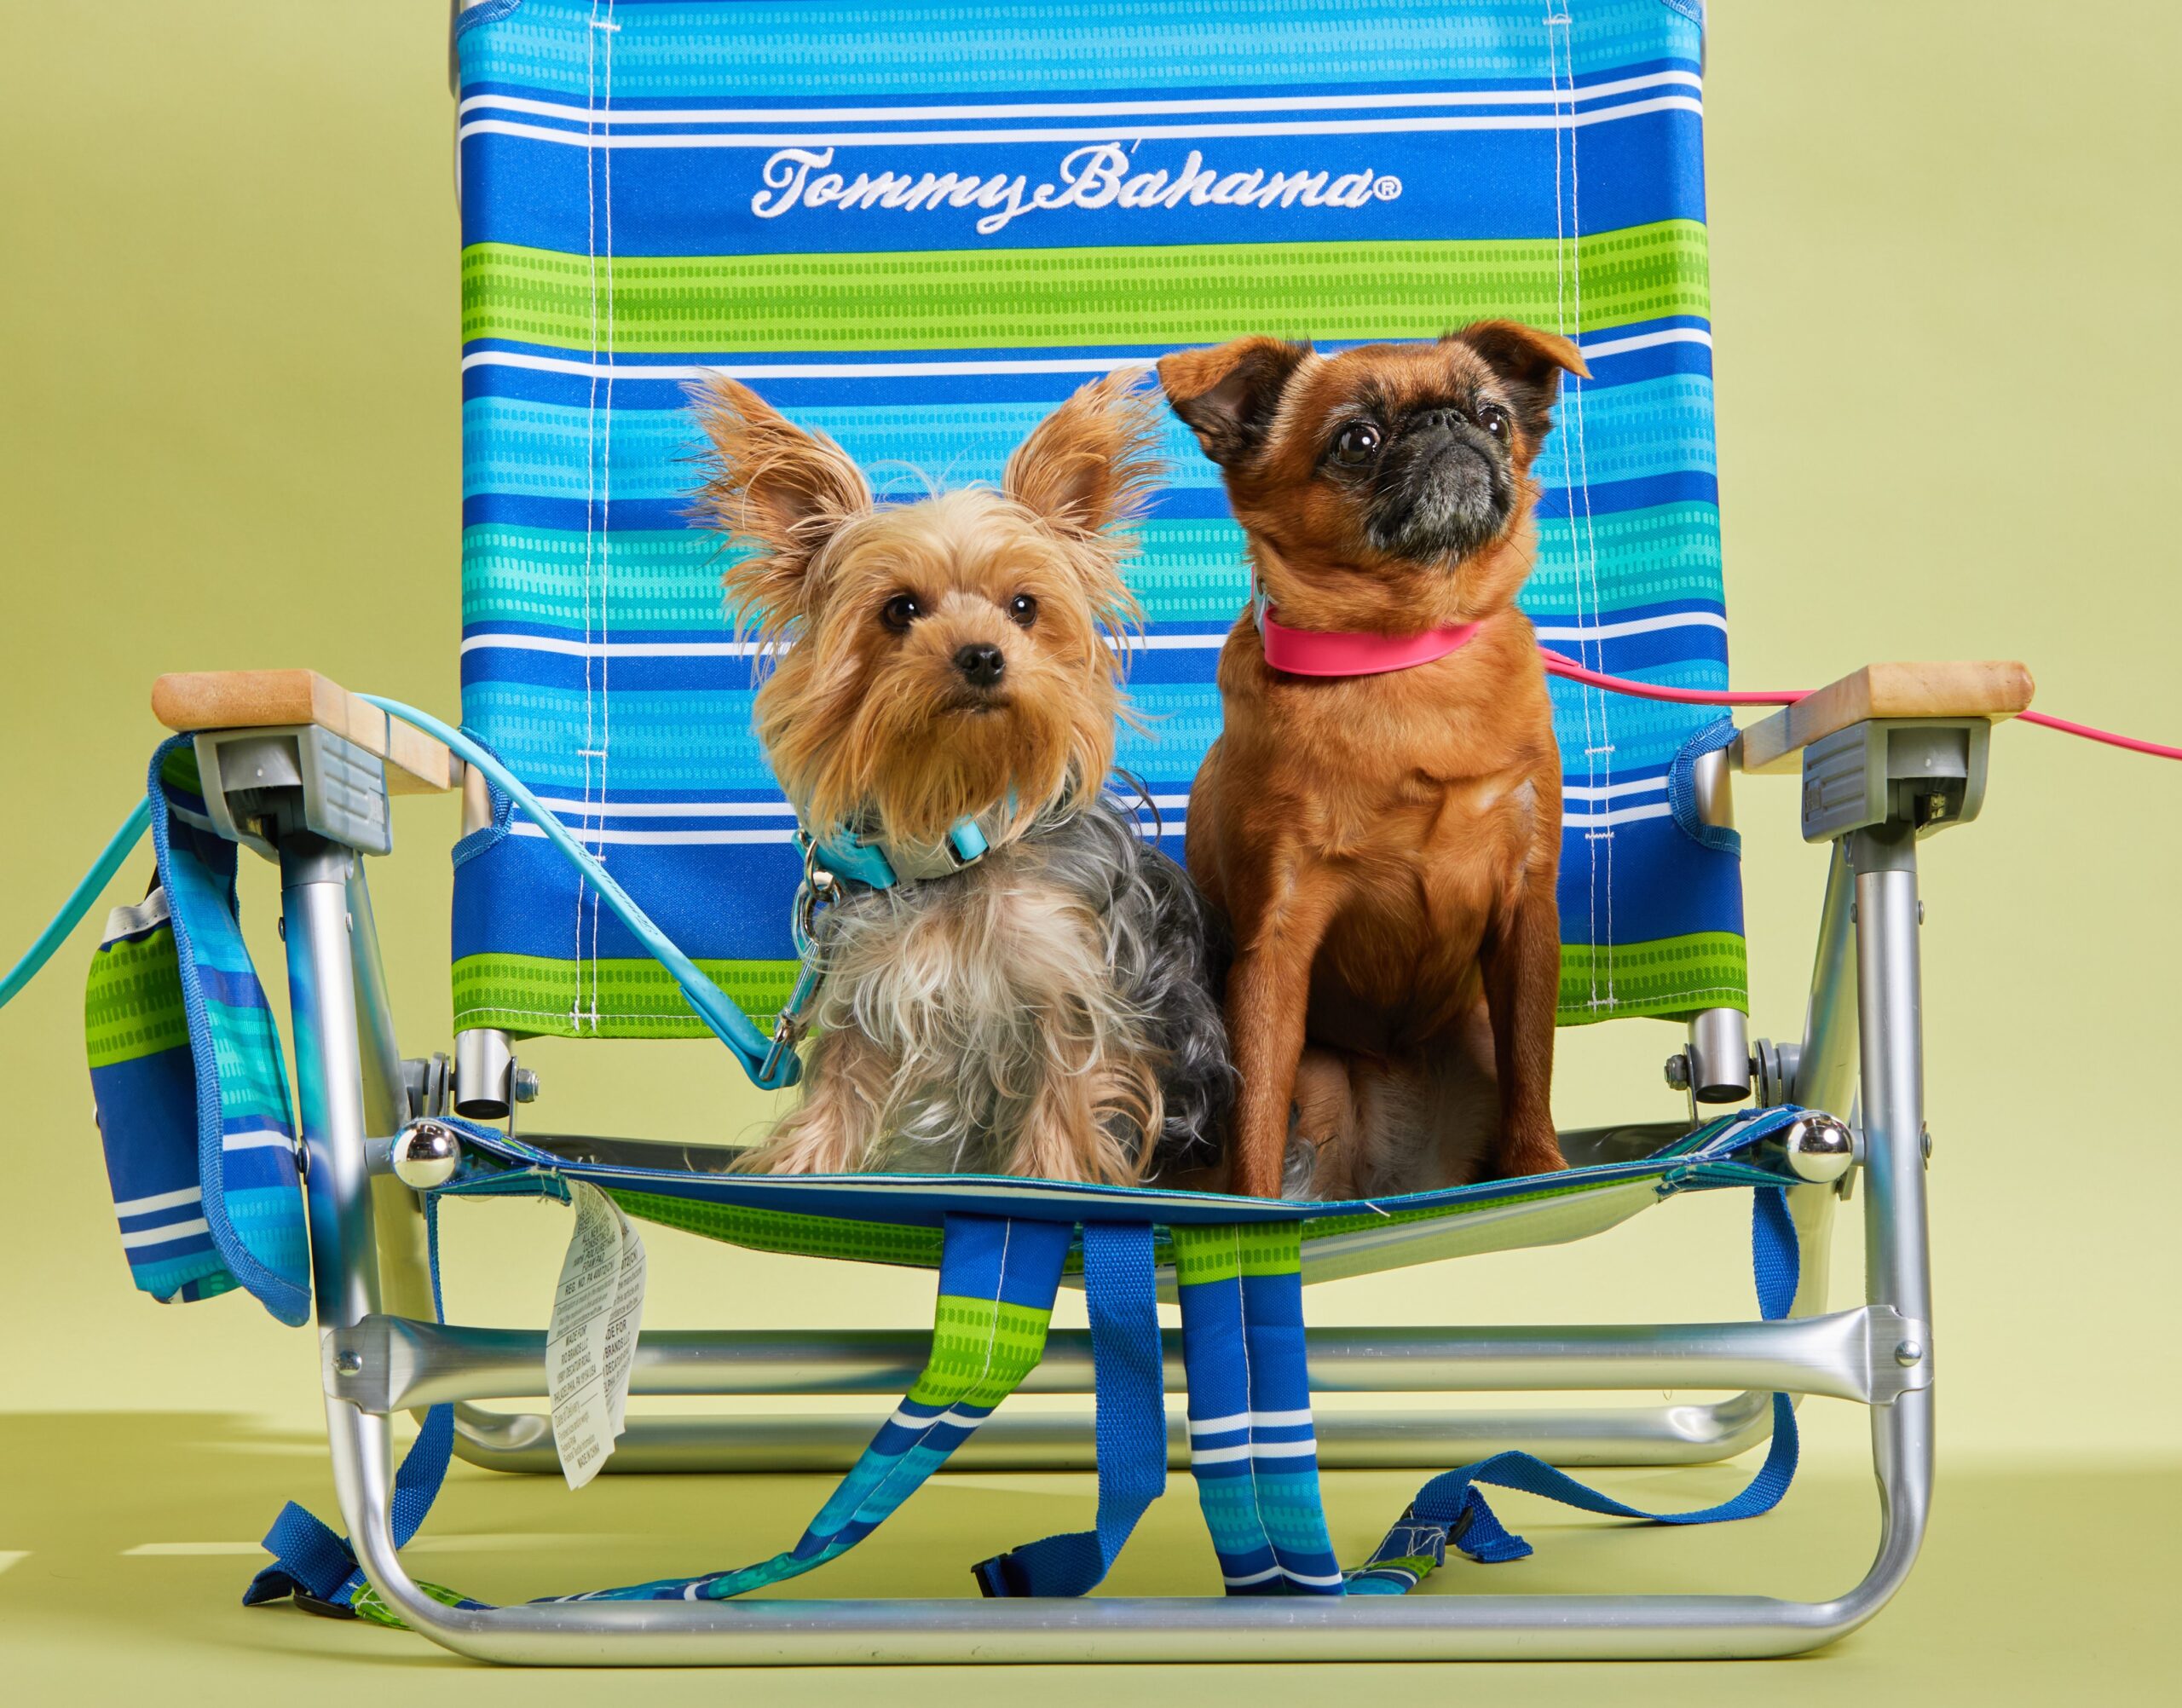 K9 Wear Partners with Tommy Bahama, Introduces Innovative Line of